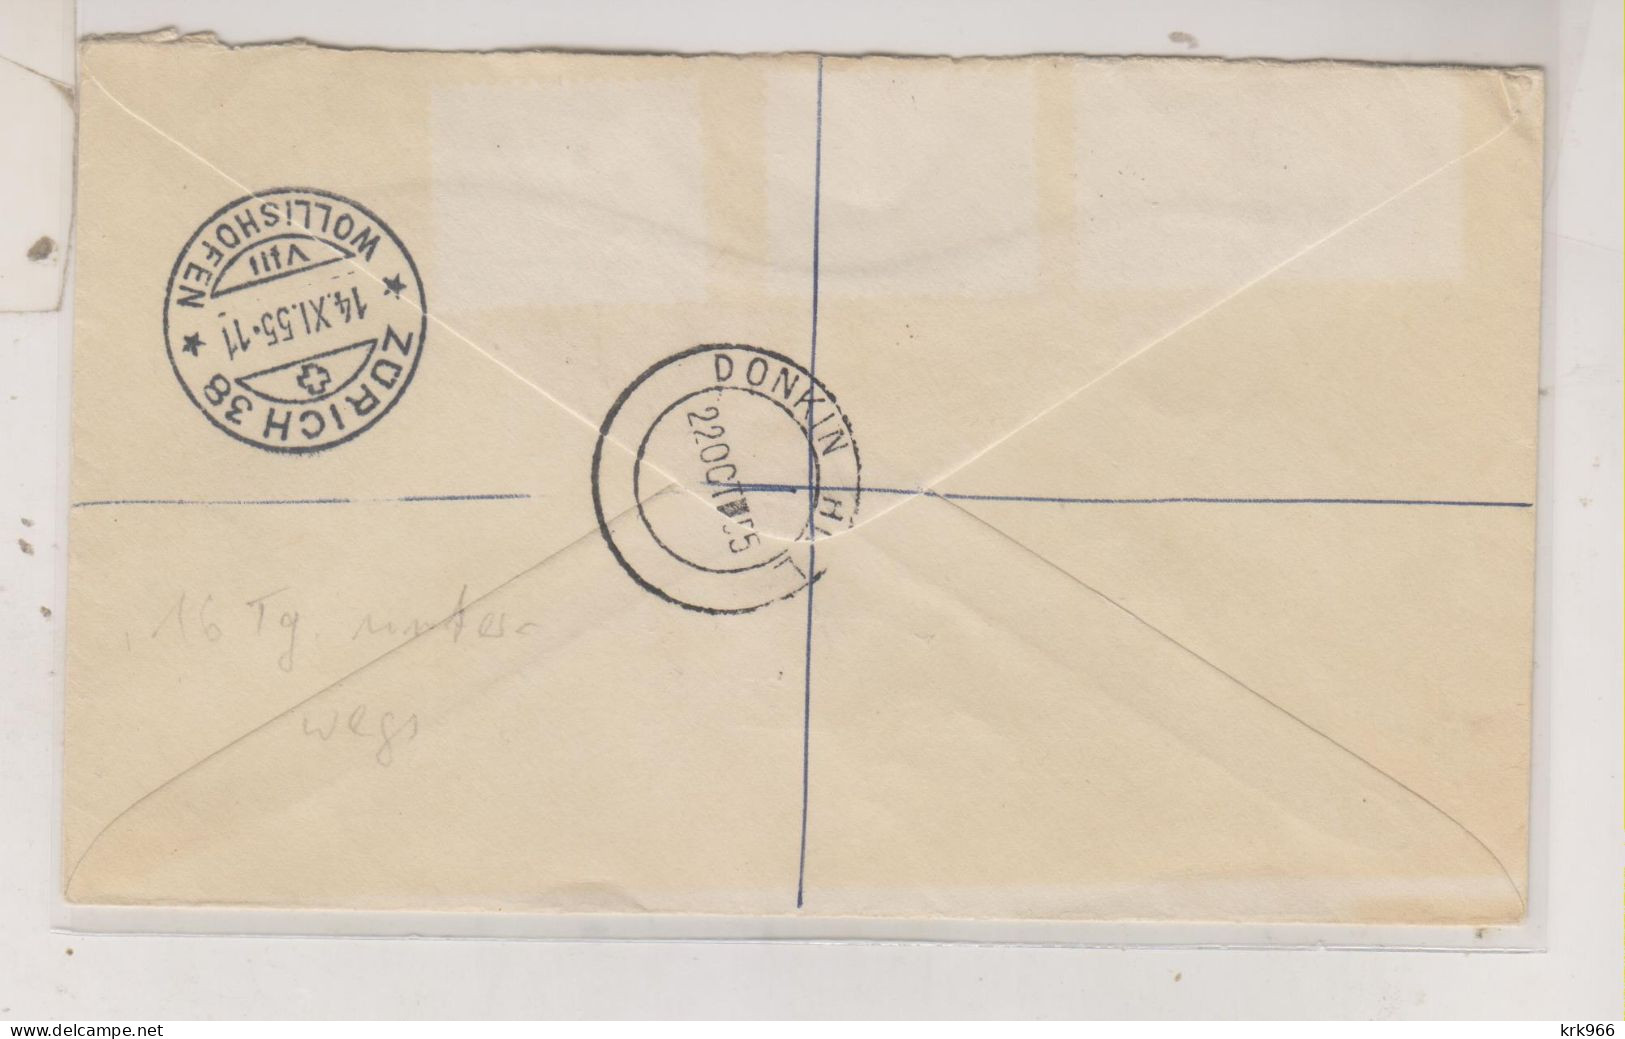 SOUTH AFRICA 1955 DONKIN HILL  Nice Registered FDC Cover To Switzerland - Poste Aérienne